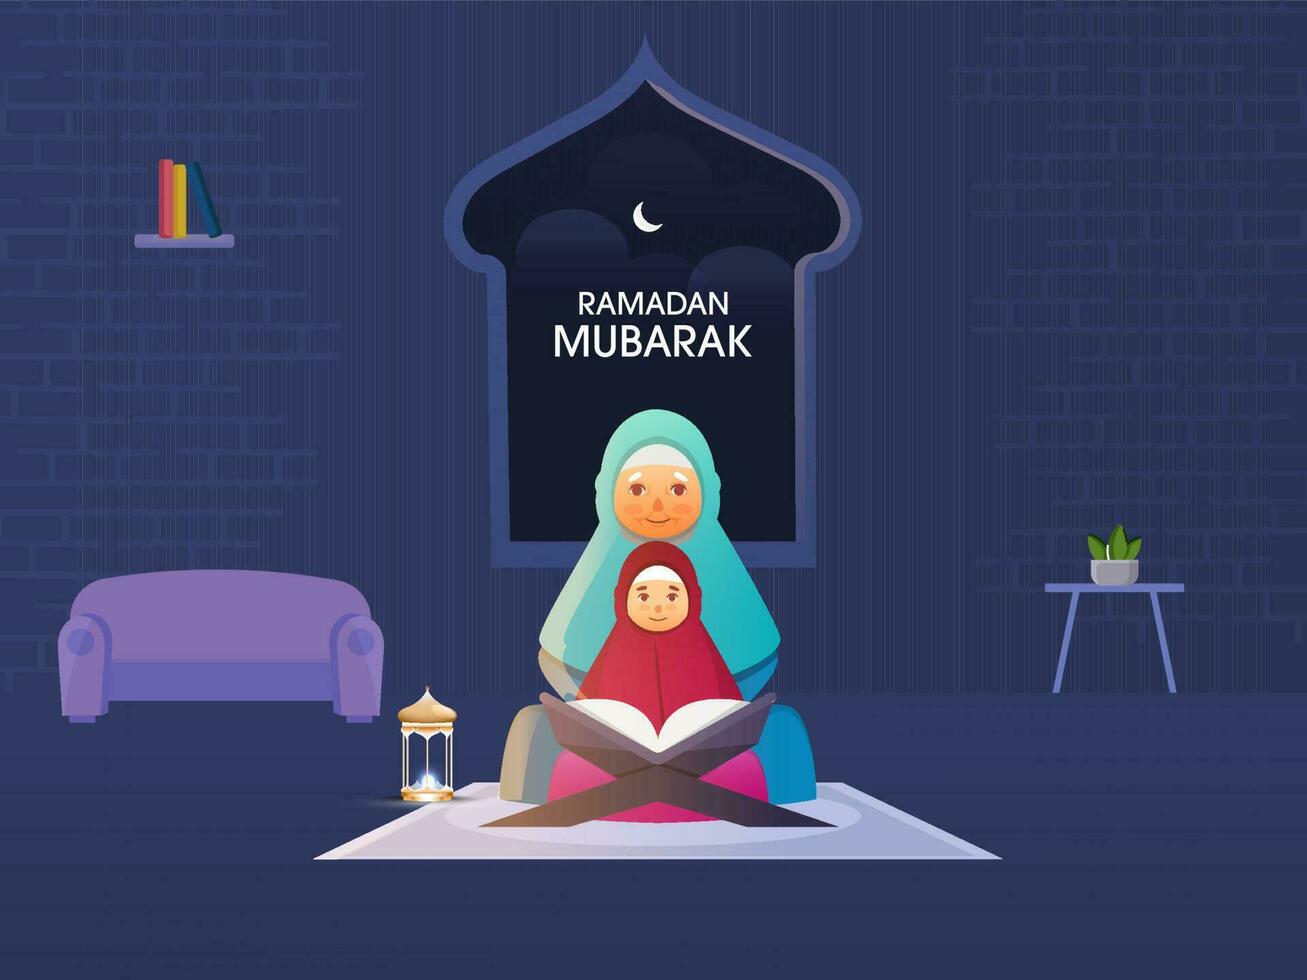 Muslim Older Woman With Her Granddaughter Reading Quran Together On Blue Interior Background For Ramadan Mubarak Concept. vector